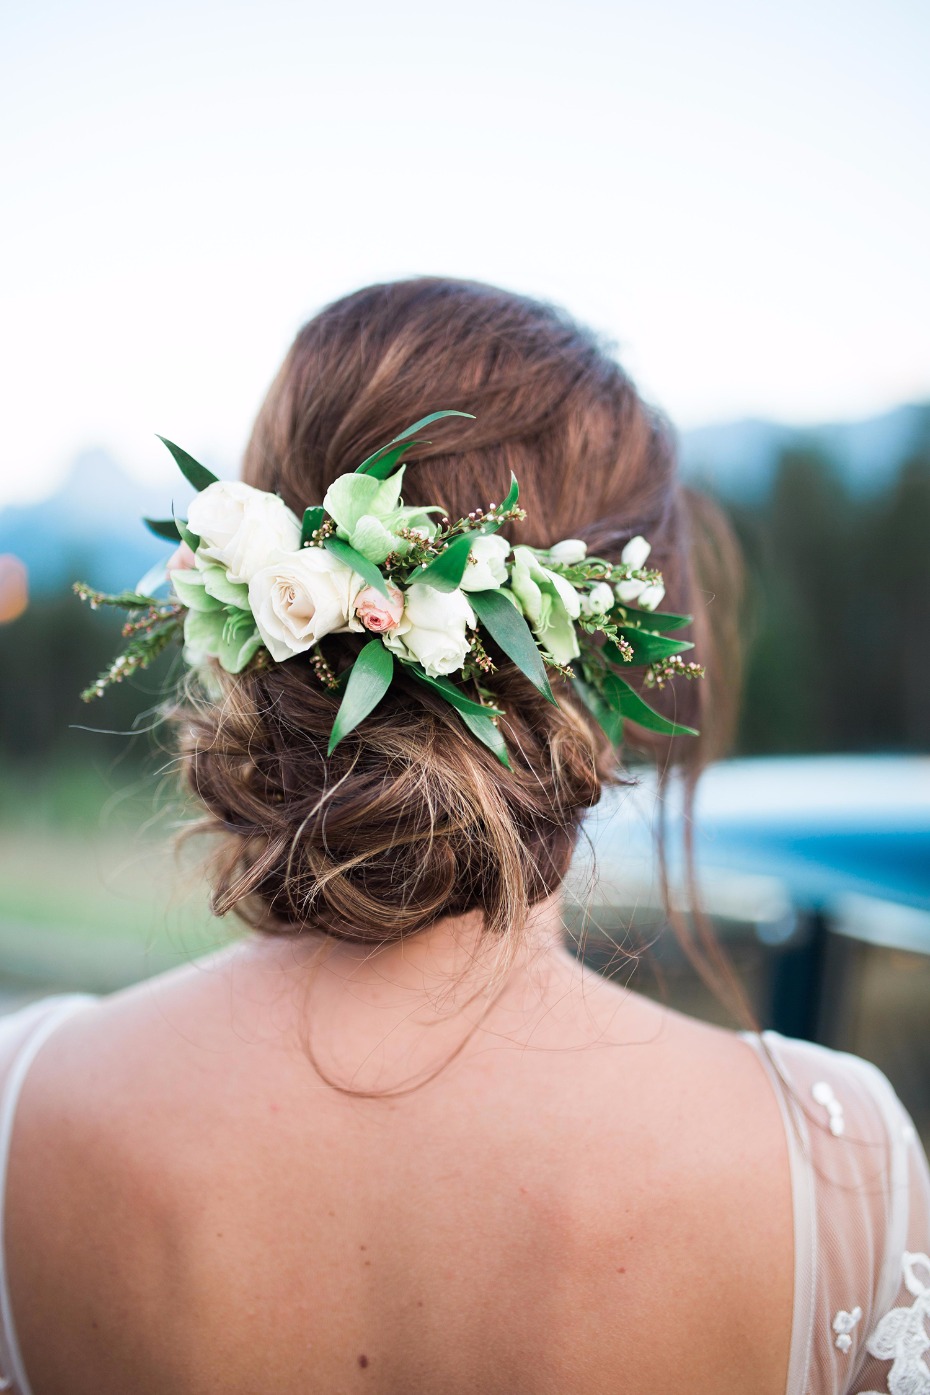 Floral hair accessory